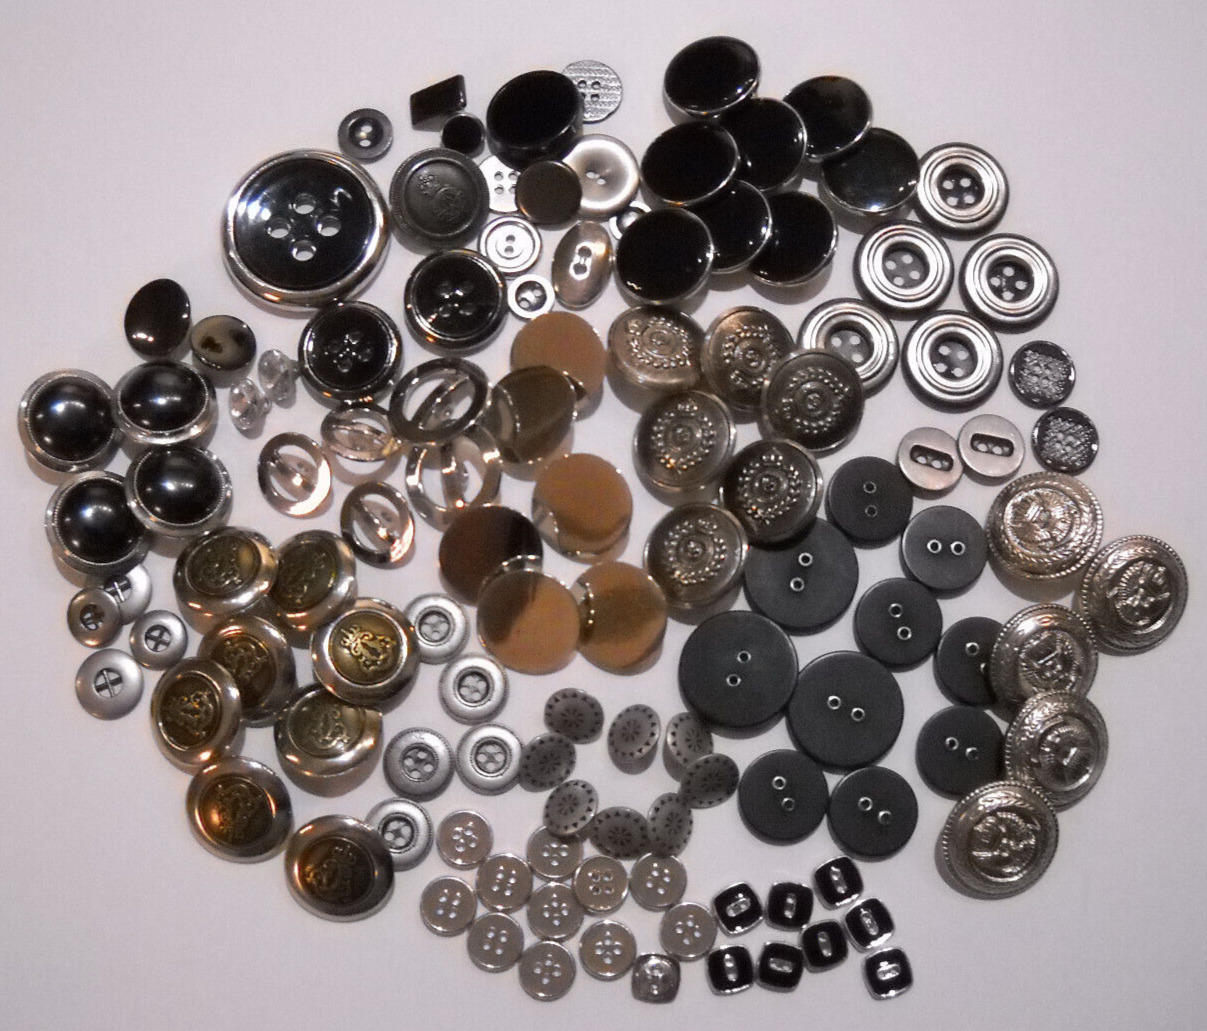 Lot 100+ Silver Tone Metal Plastic Buttons Craft Art Sewing Replacement